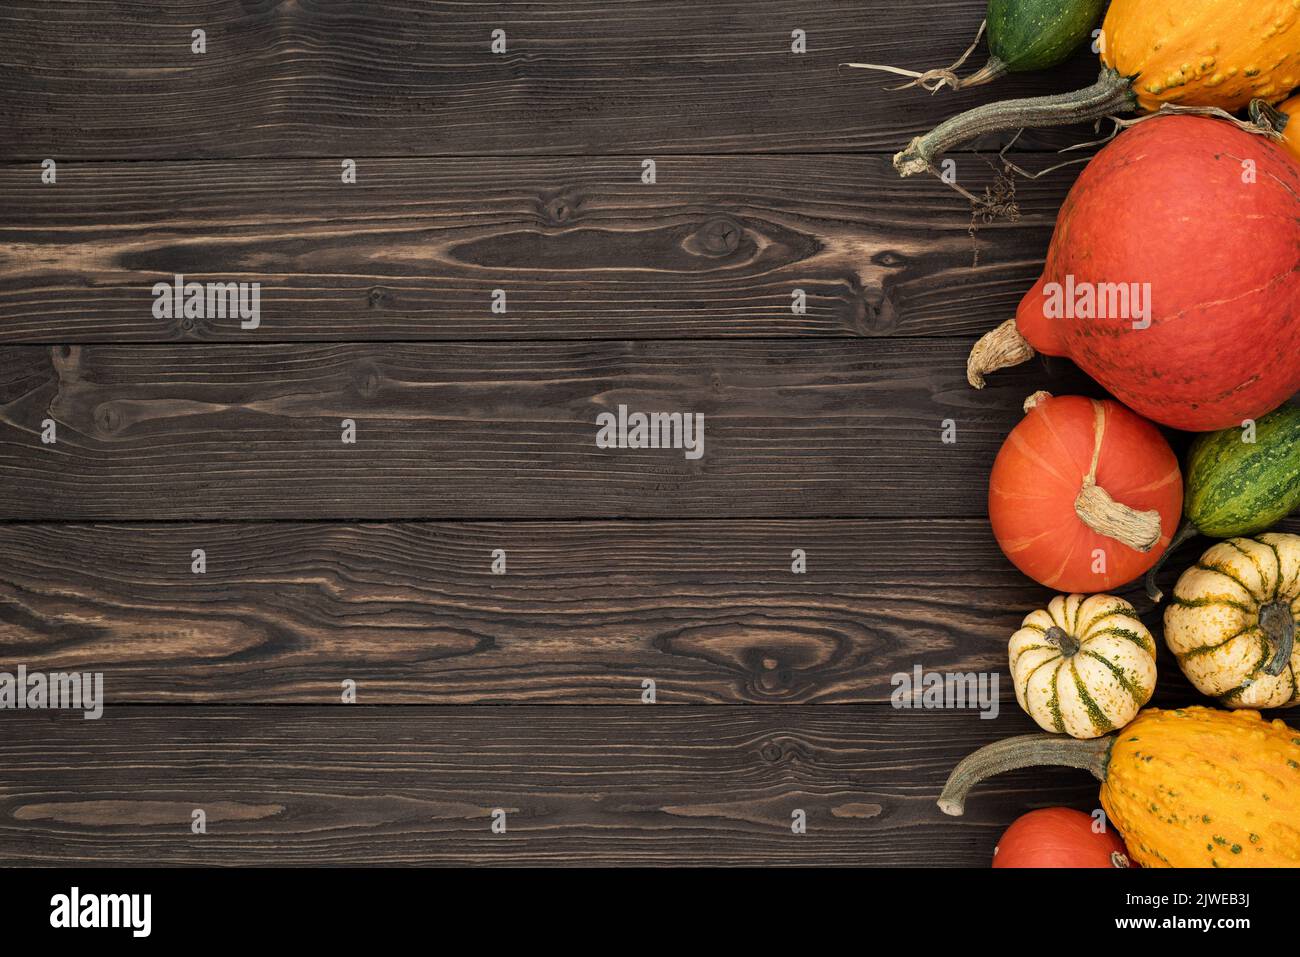 Thanksgiving day greeting card with pumpkin, decorative gourds and winter squash on wooden background Stock Photo